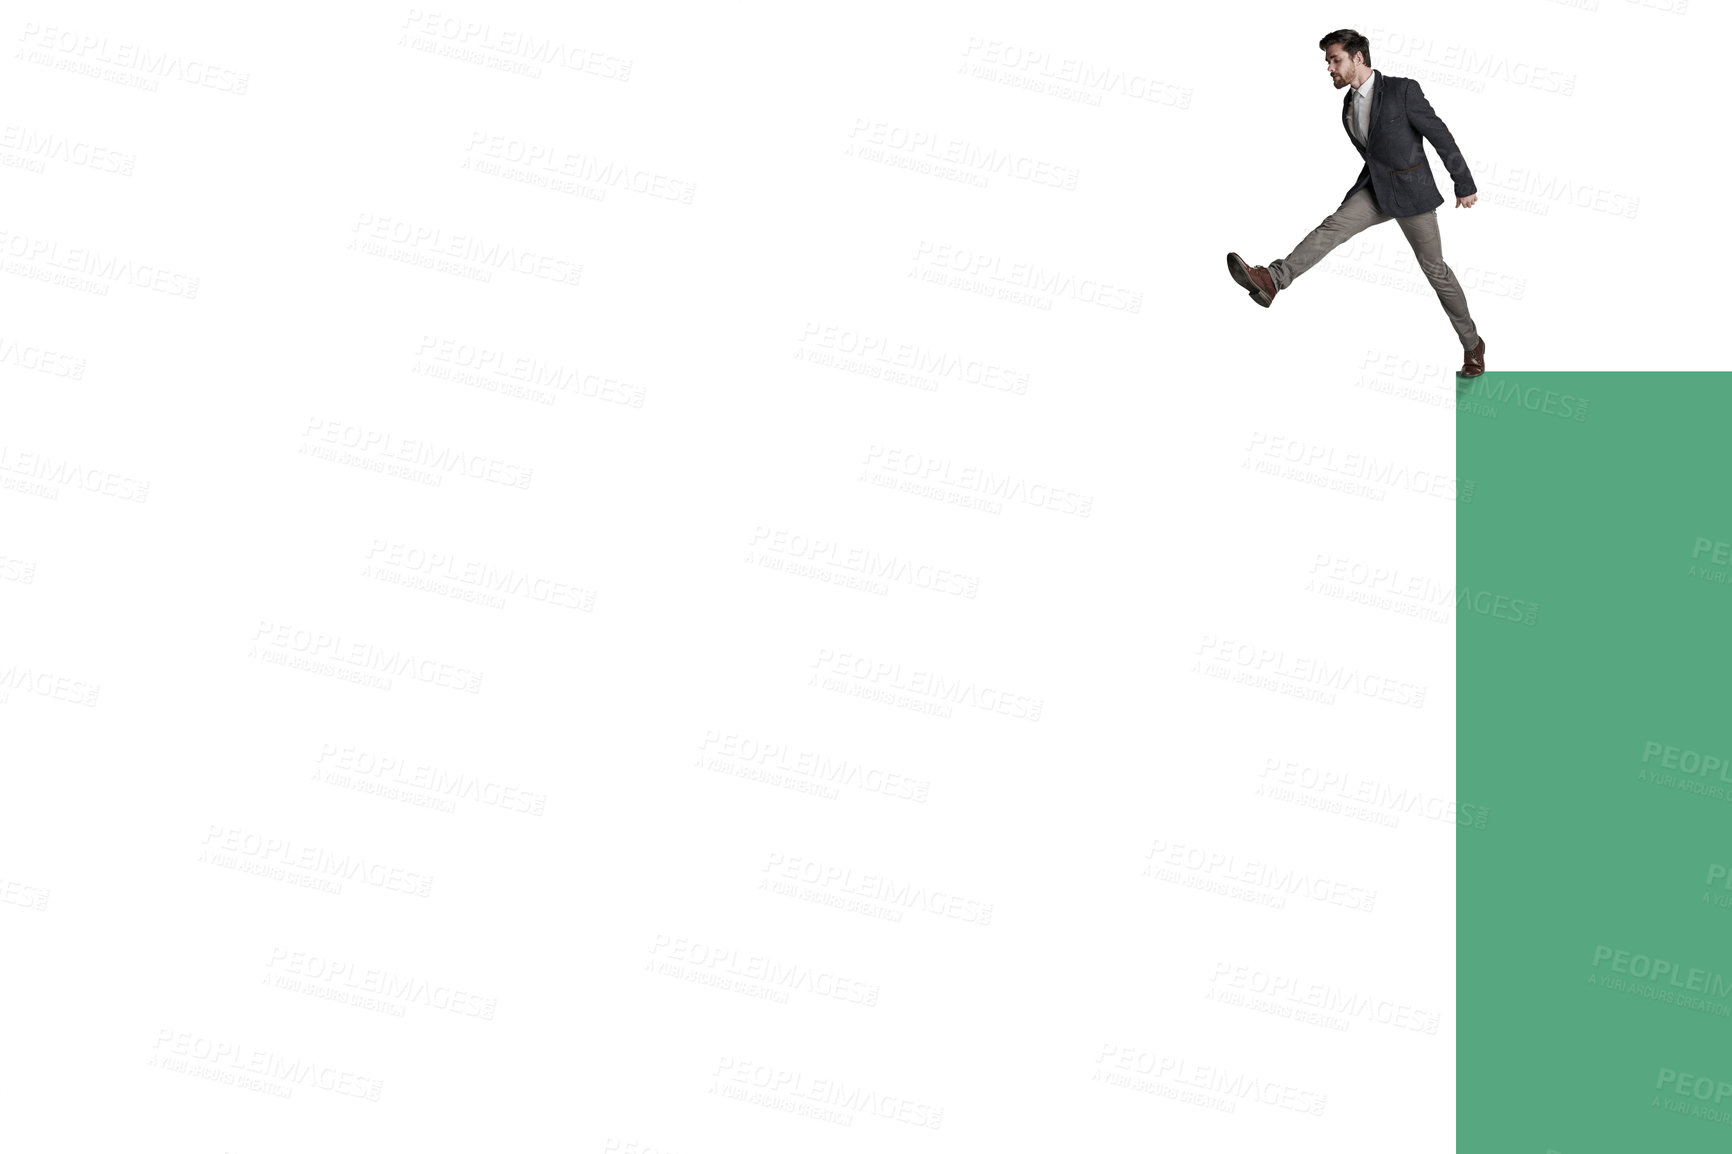 Buy stock photo Shot of a businessman about to jump from the edge of a cliff against a white background